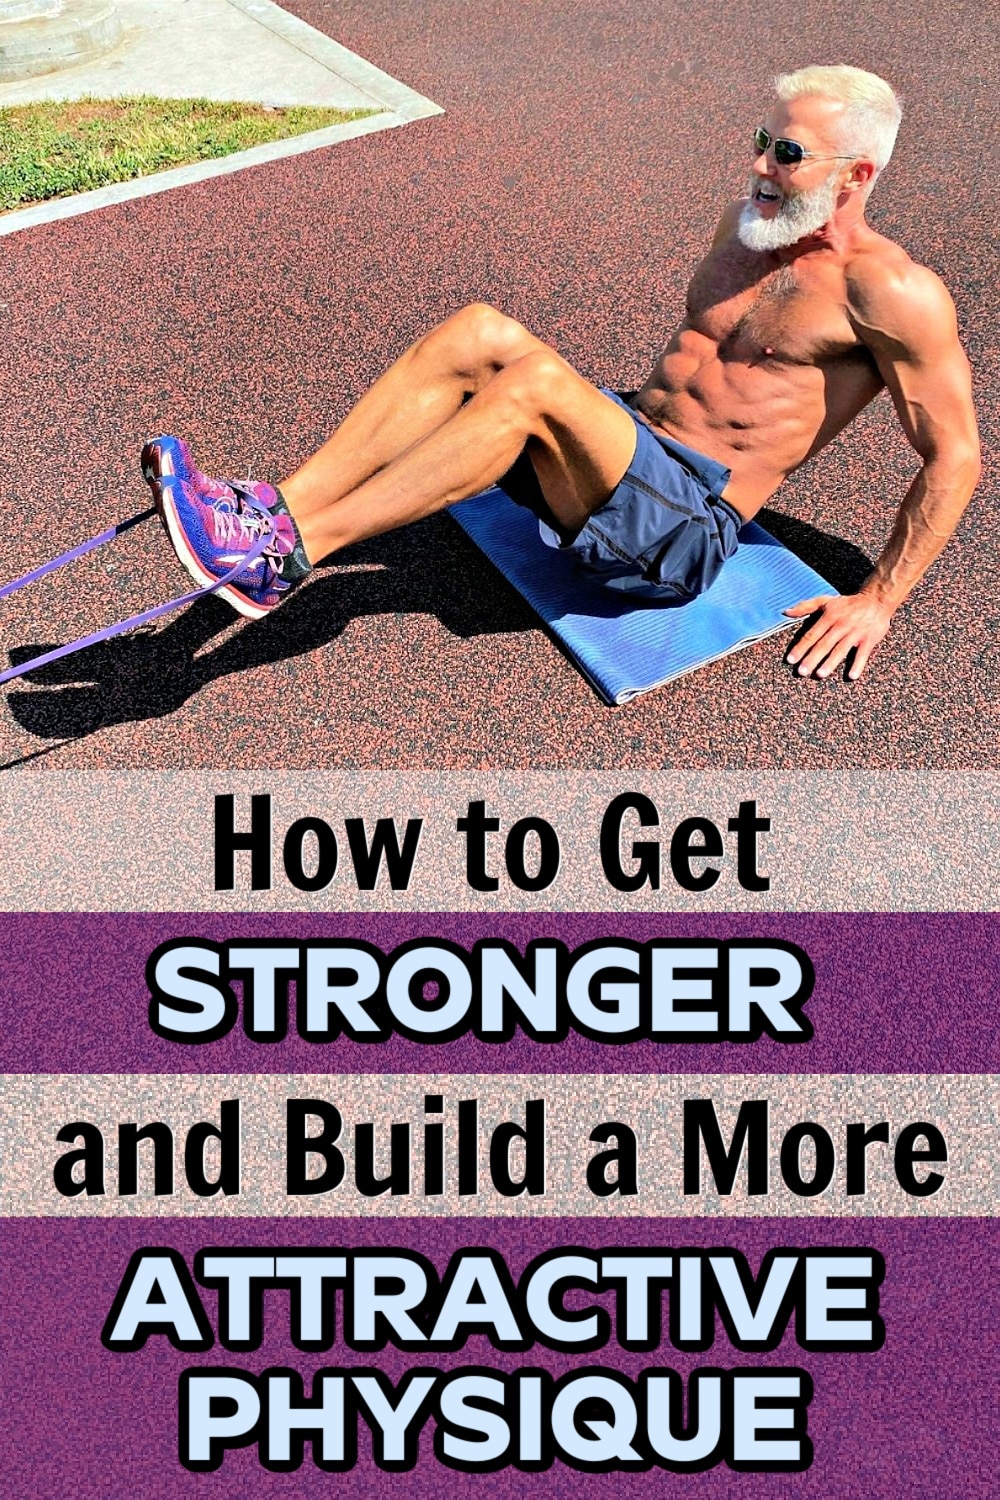 How to Get Bigger: 3 Ways to Build a Stronger & More Attractive Body